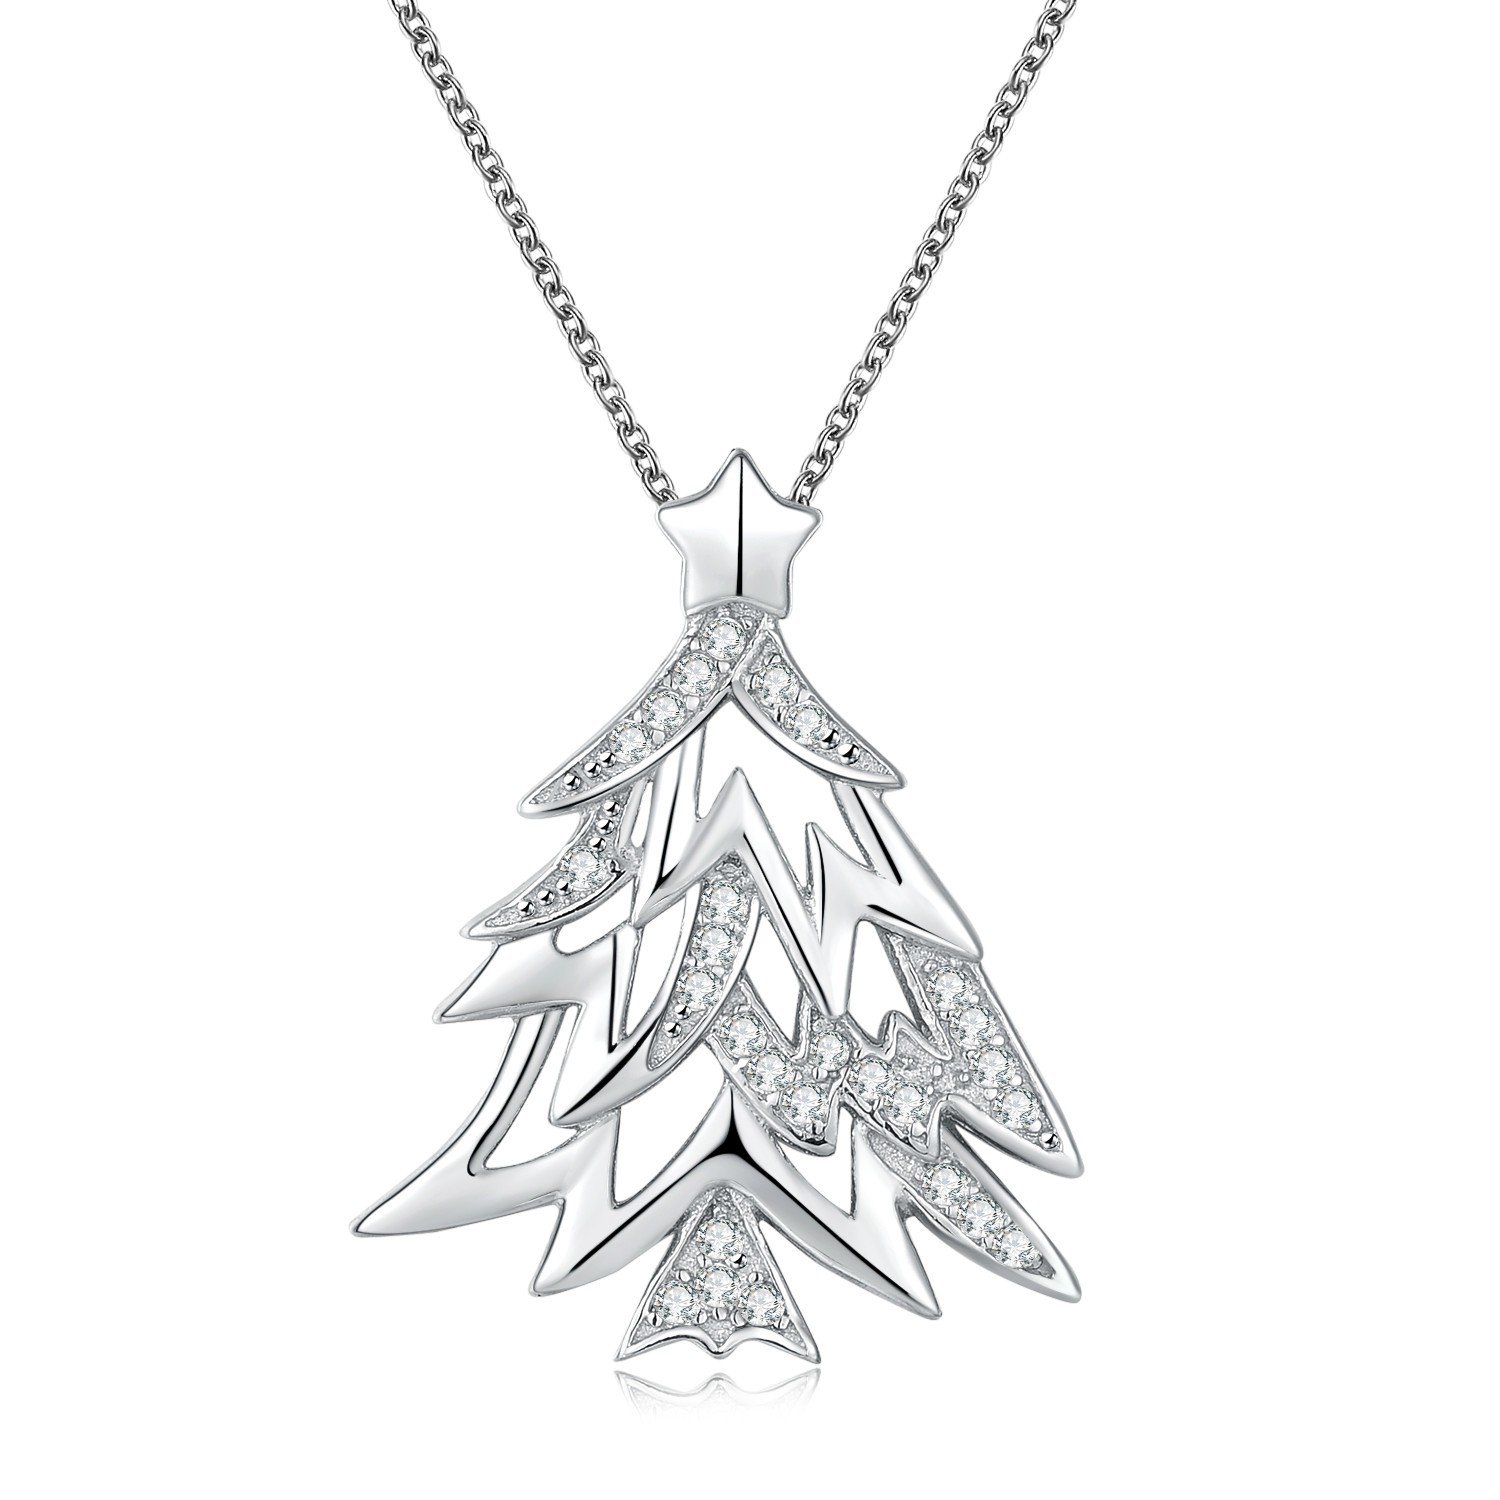 HIgh Quality Trendy Women Jewelry Cubic Zirconia 925 sterling silver necklaceChristmas Tree Necklace